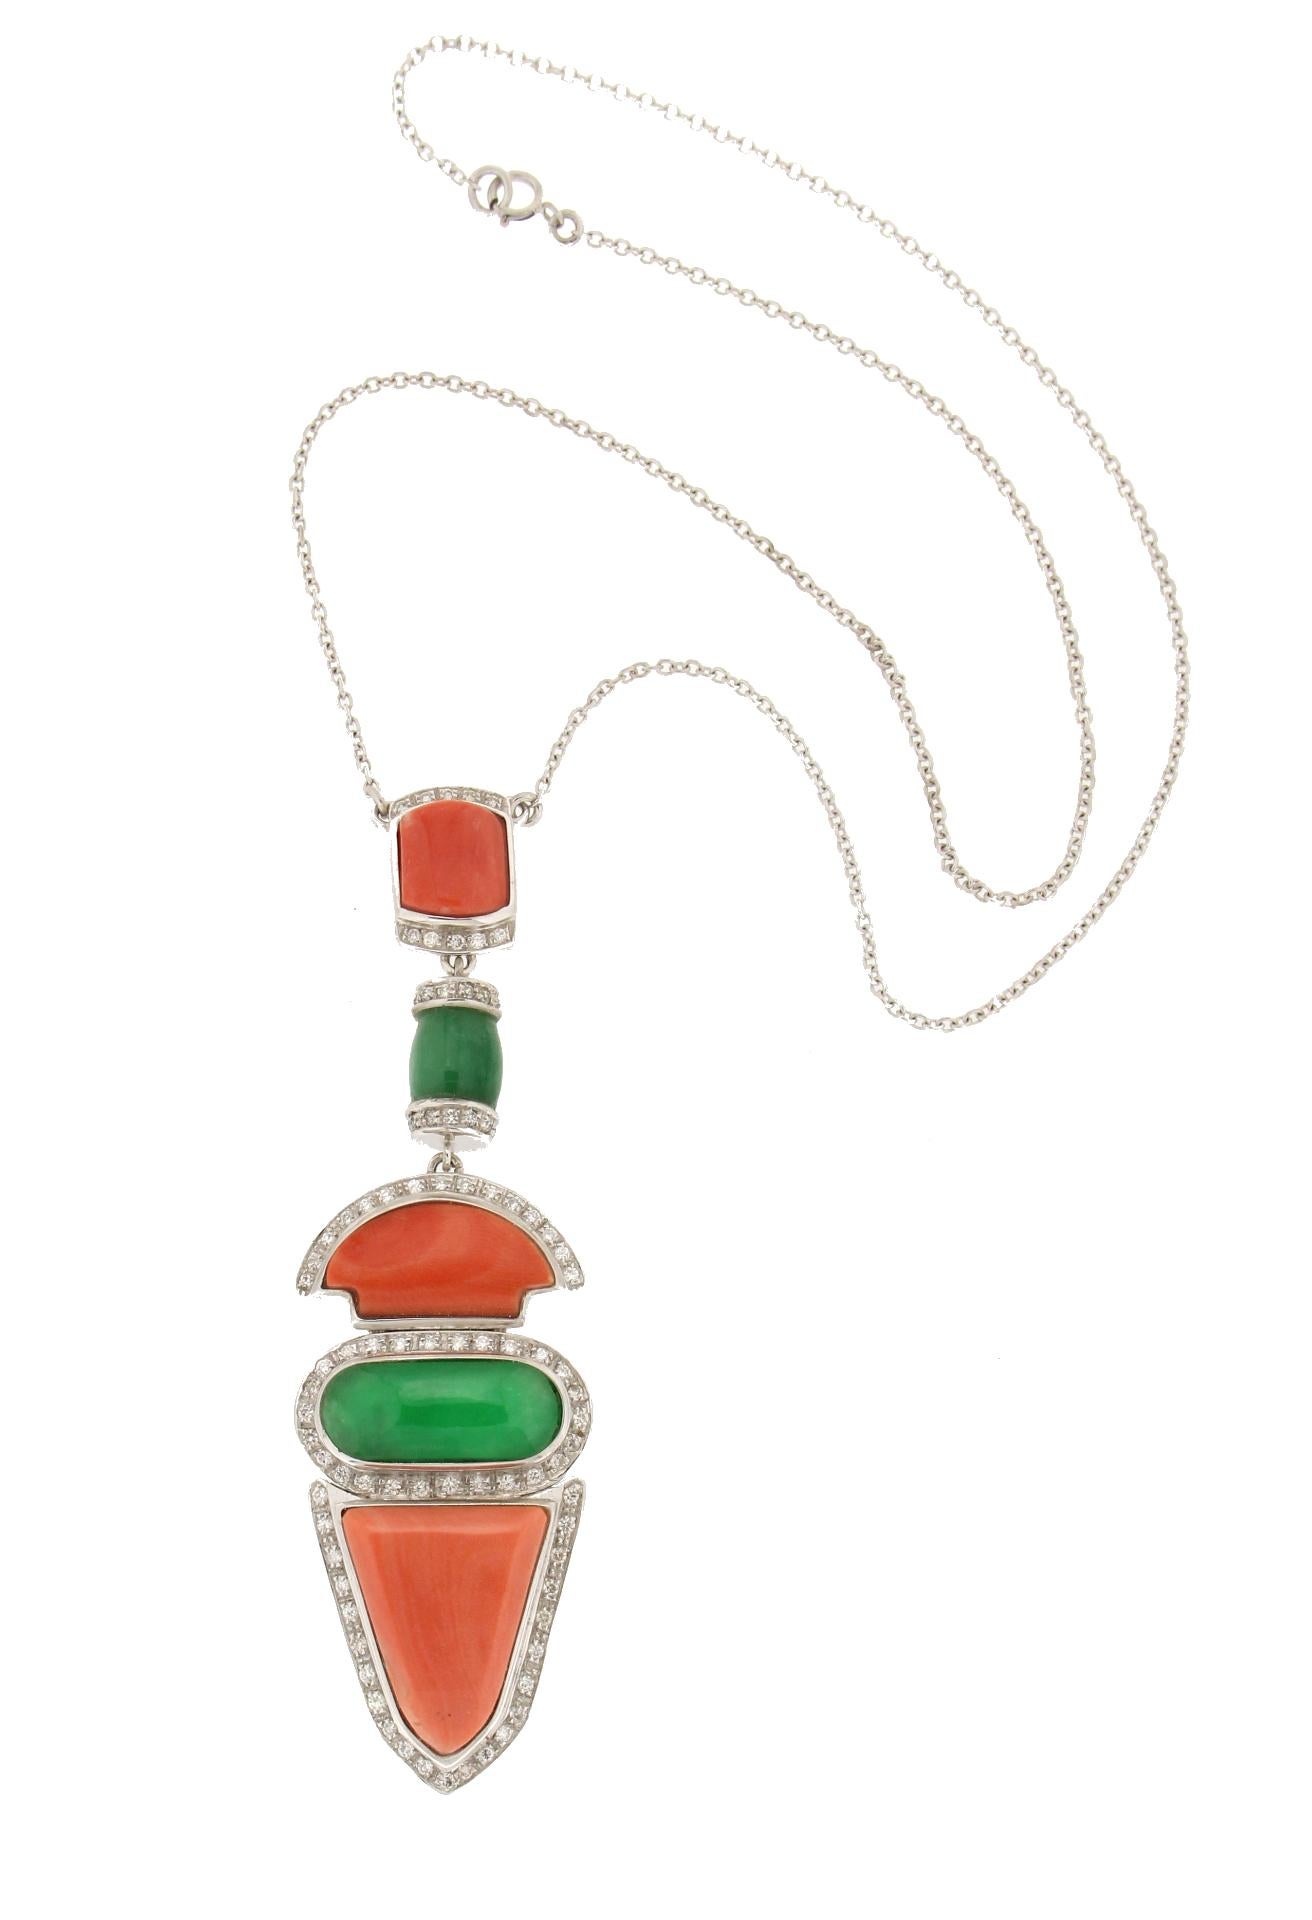 Artisan Handcraft Coral 18 Karat White Gold Green Agate Pendant Necklace For Sale